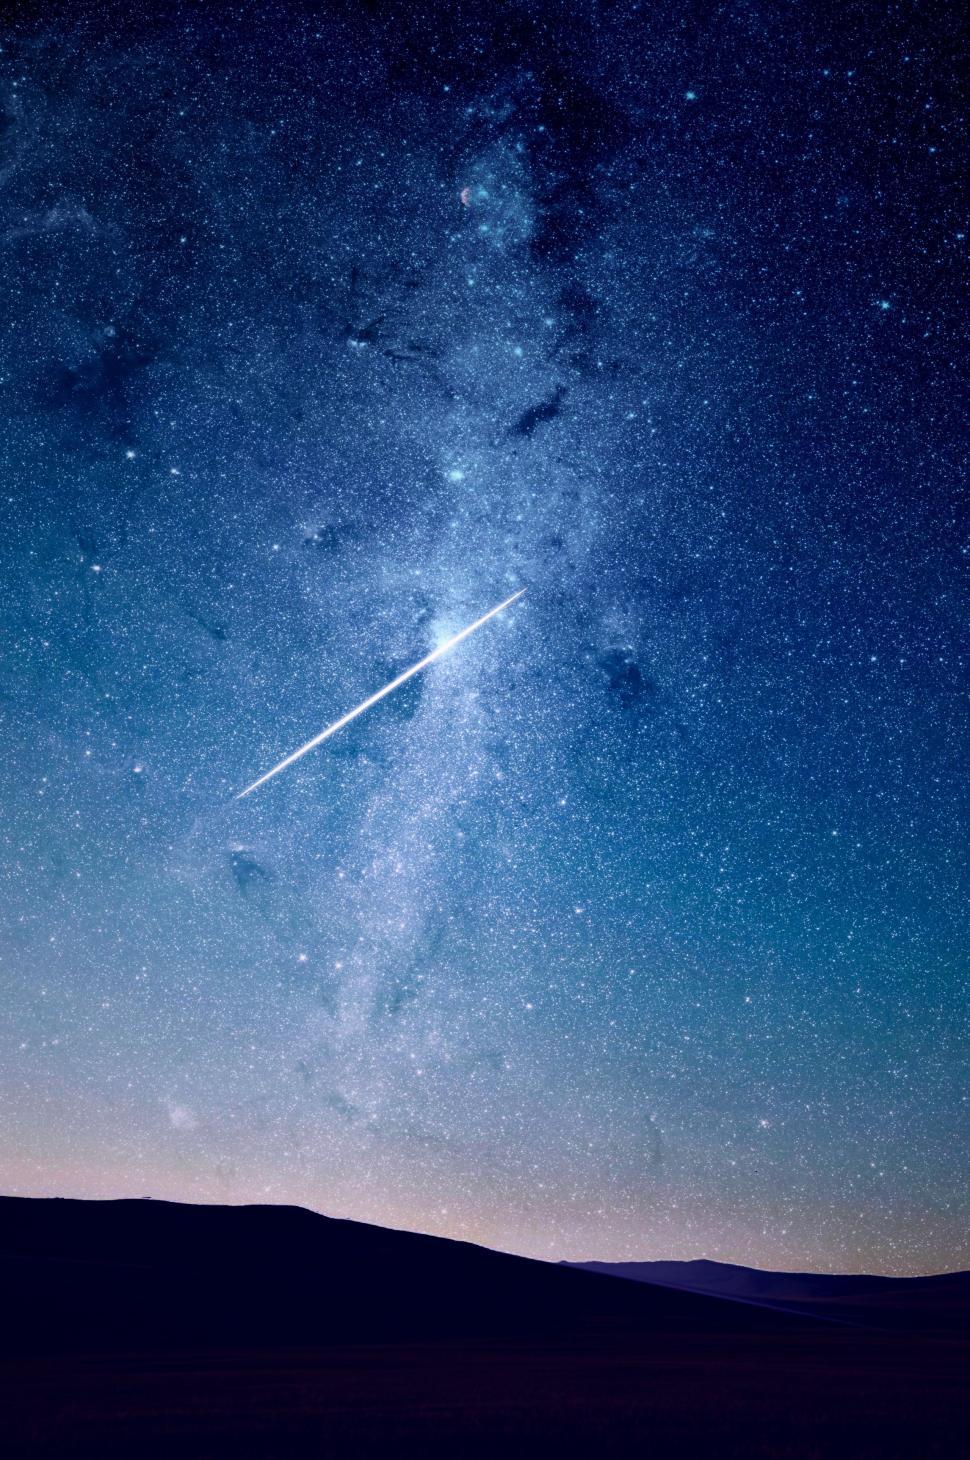 Free Image of Airplane Flying Through the Night Sky 